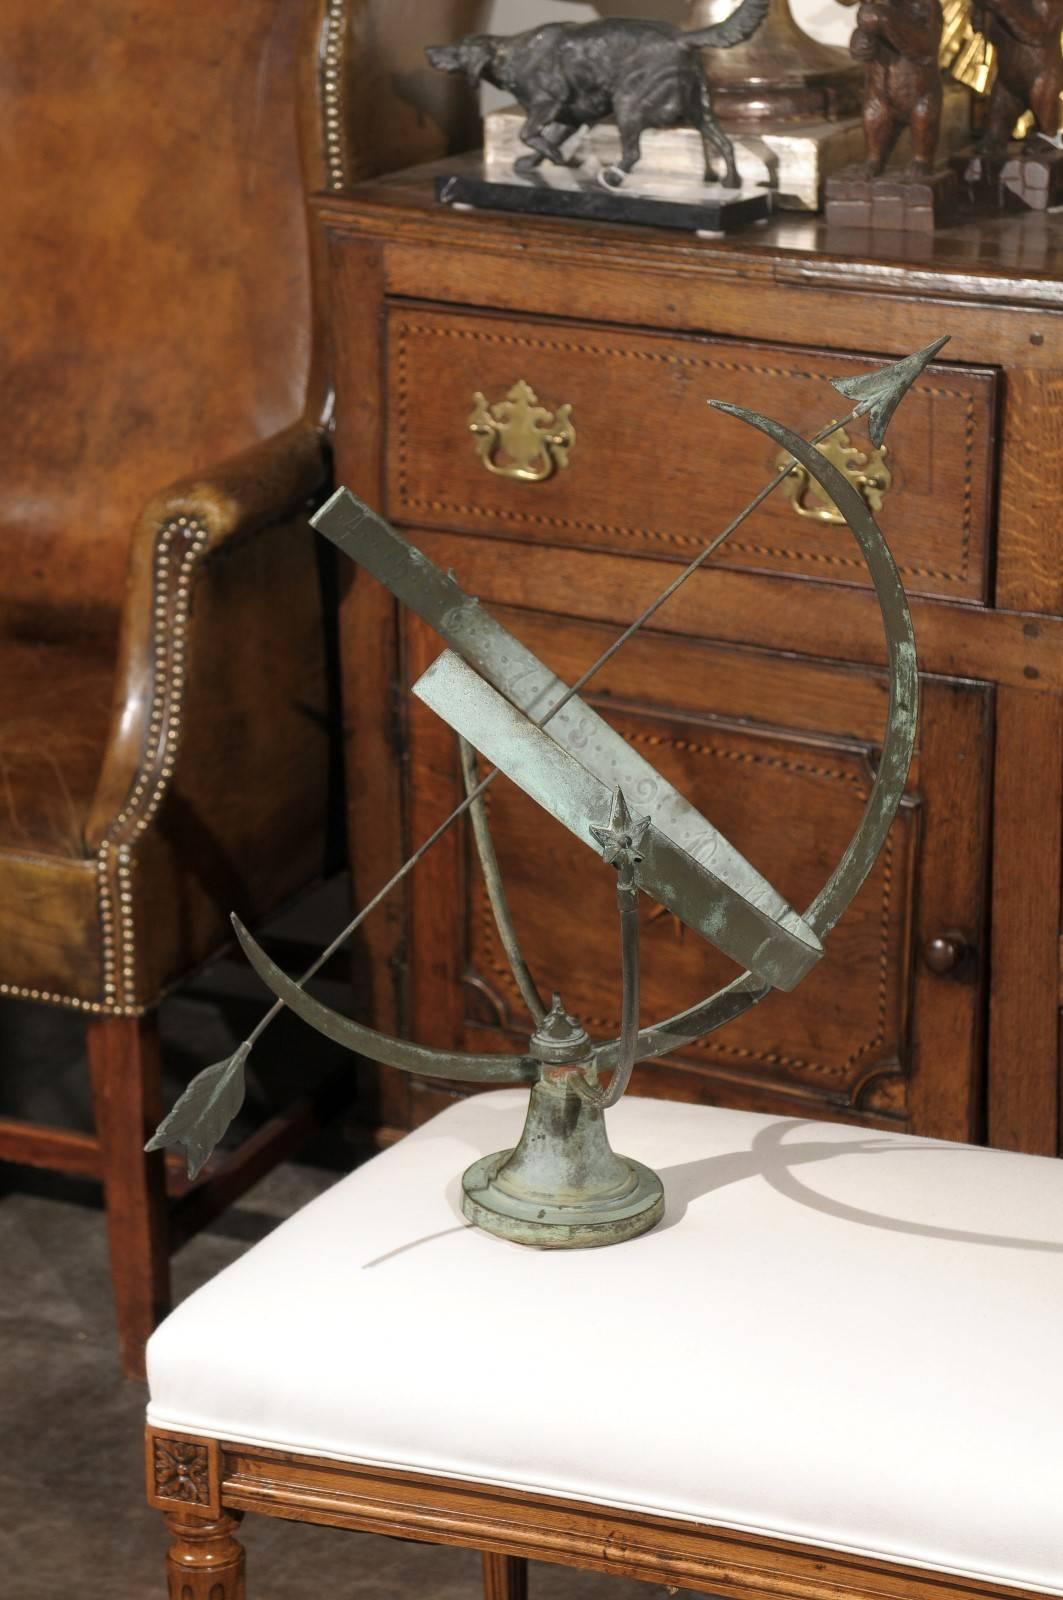 A metal armillary sphere sundial from the early 20th century. This circa 1920 armillary sphere sundial (also called shadow-clocks or equatorial sundials) features partial exterior rings that support the ecliptic ring upon which the hours are